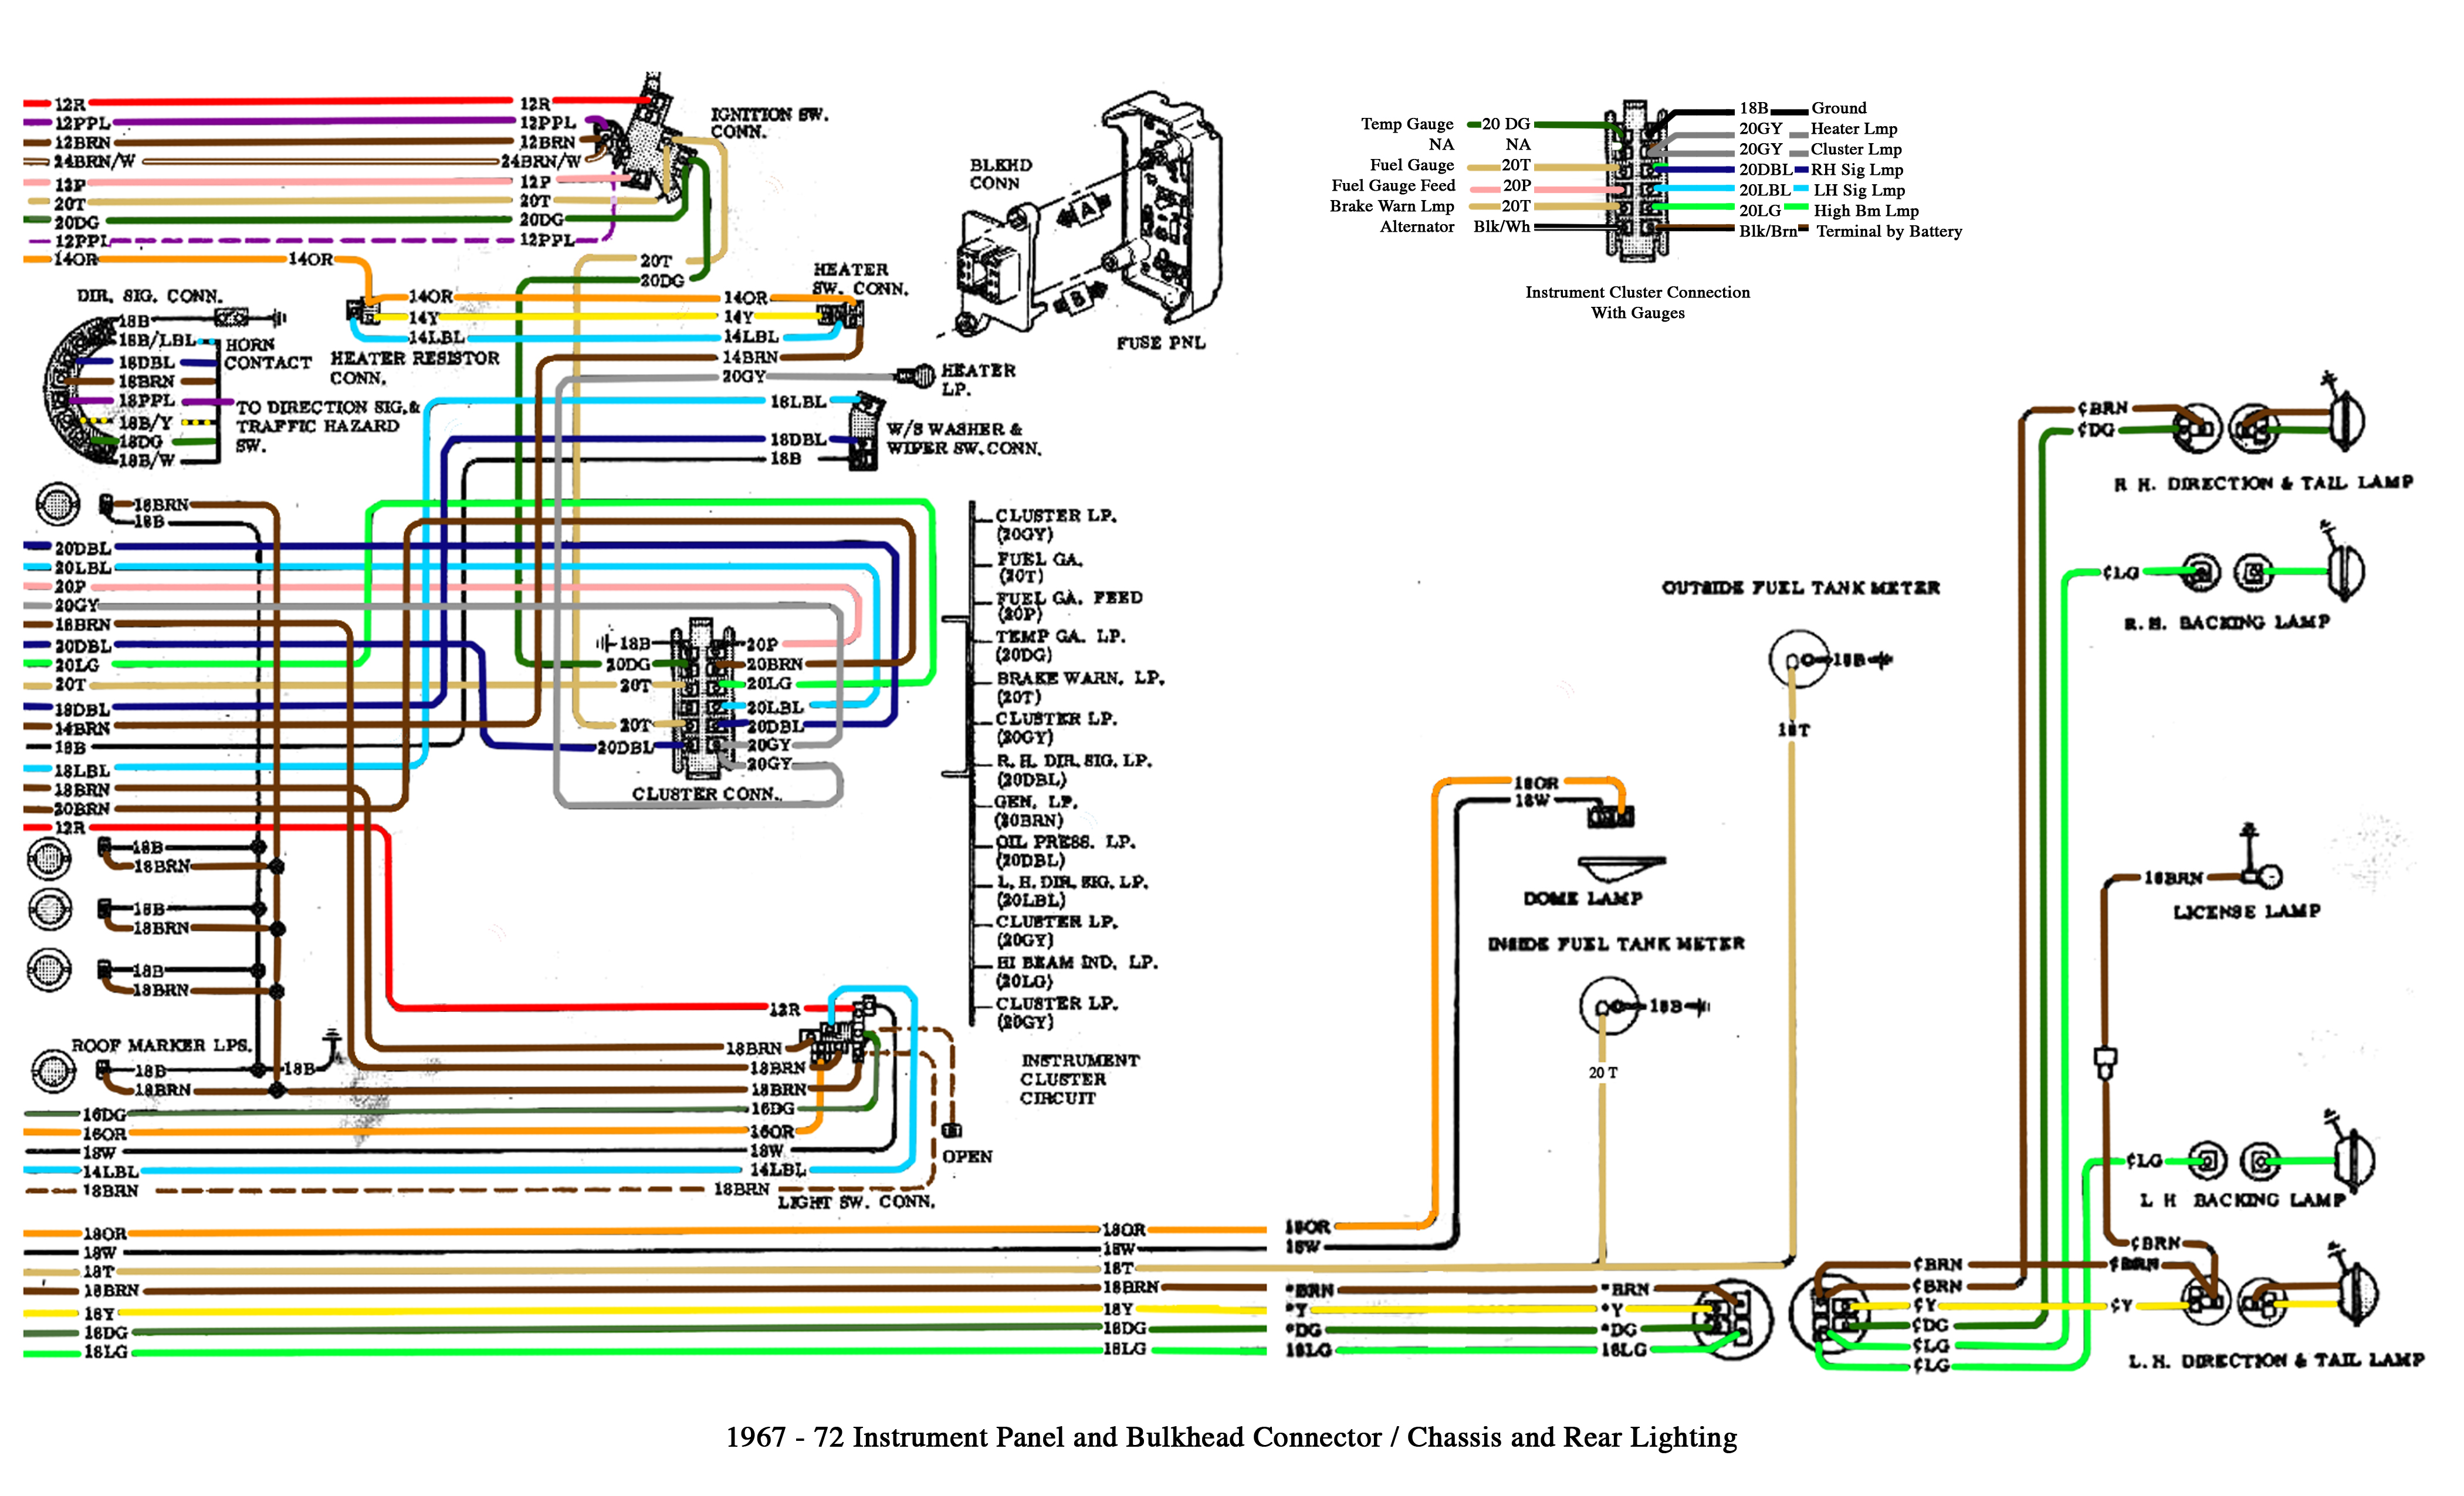 Color Wiring Diagram FINISHED - The 1947 - Present Chevrolet & GMC